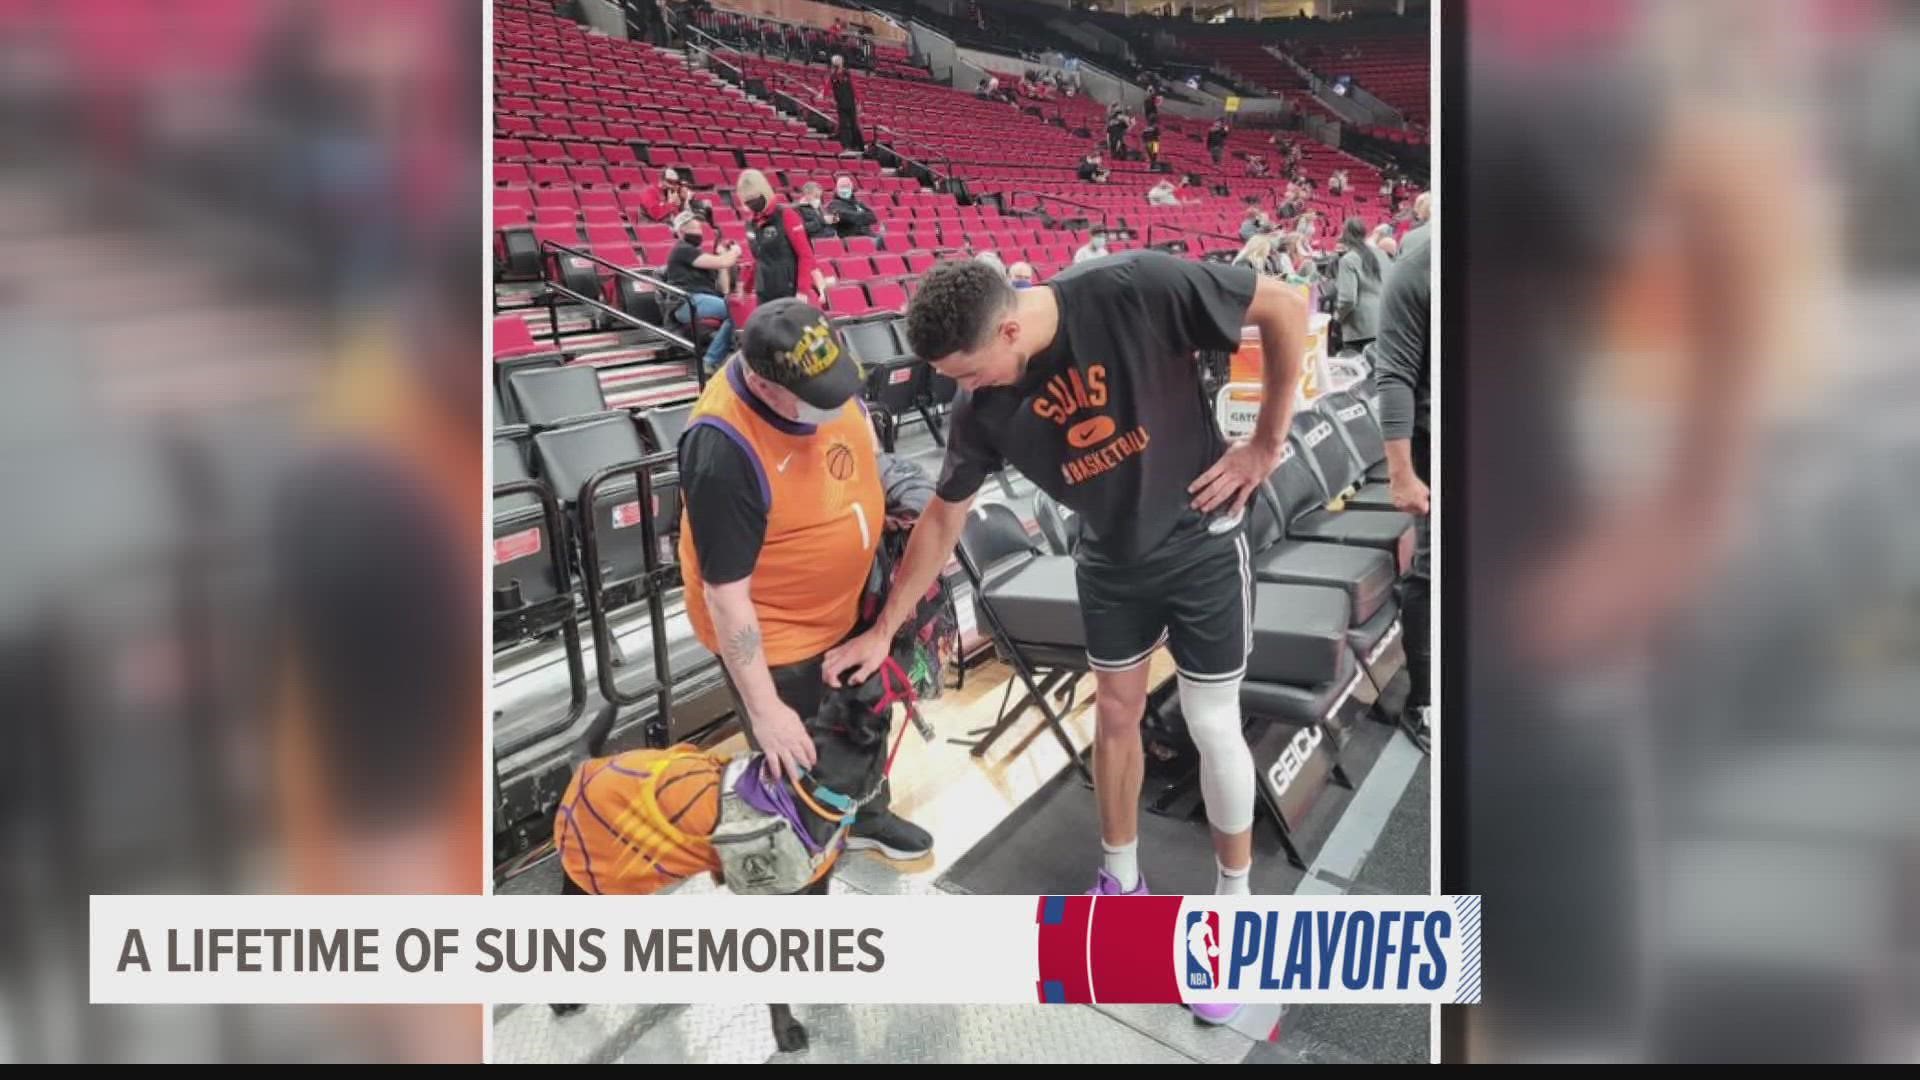 In this Suns’ run, the fans turned the Footprint Center into the loudest arena in the NBA. Plus, Cam caught up with Peter Greene and his service dog, Booker.